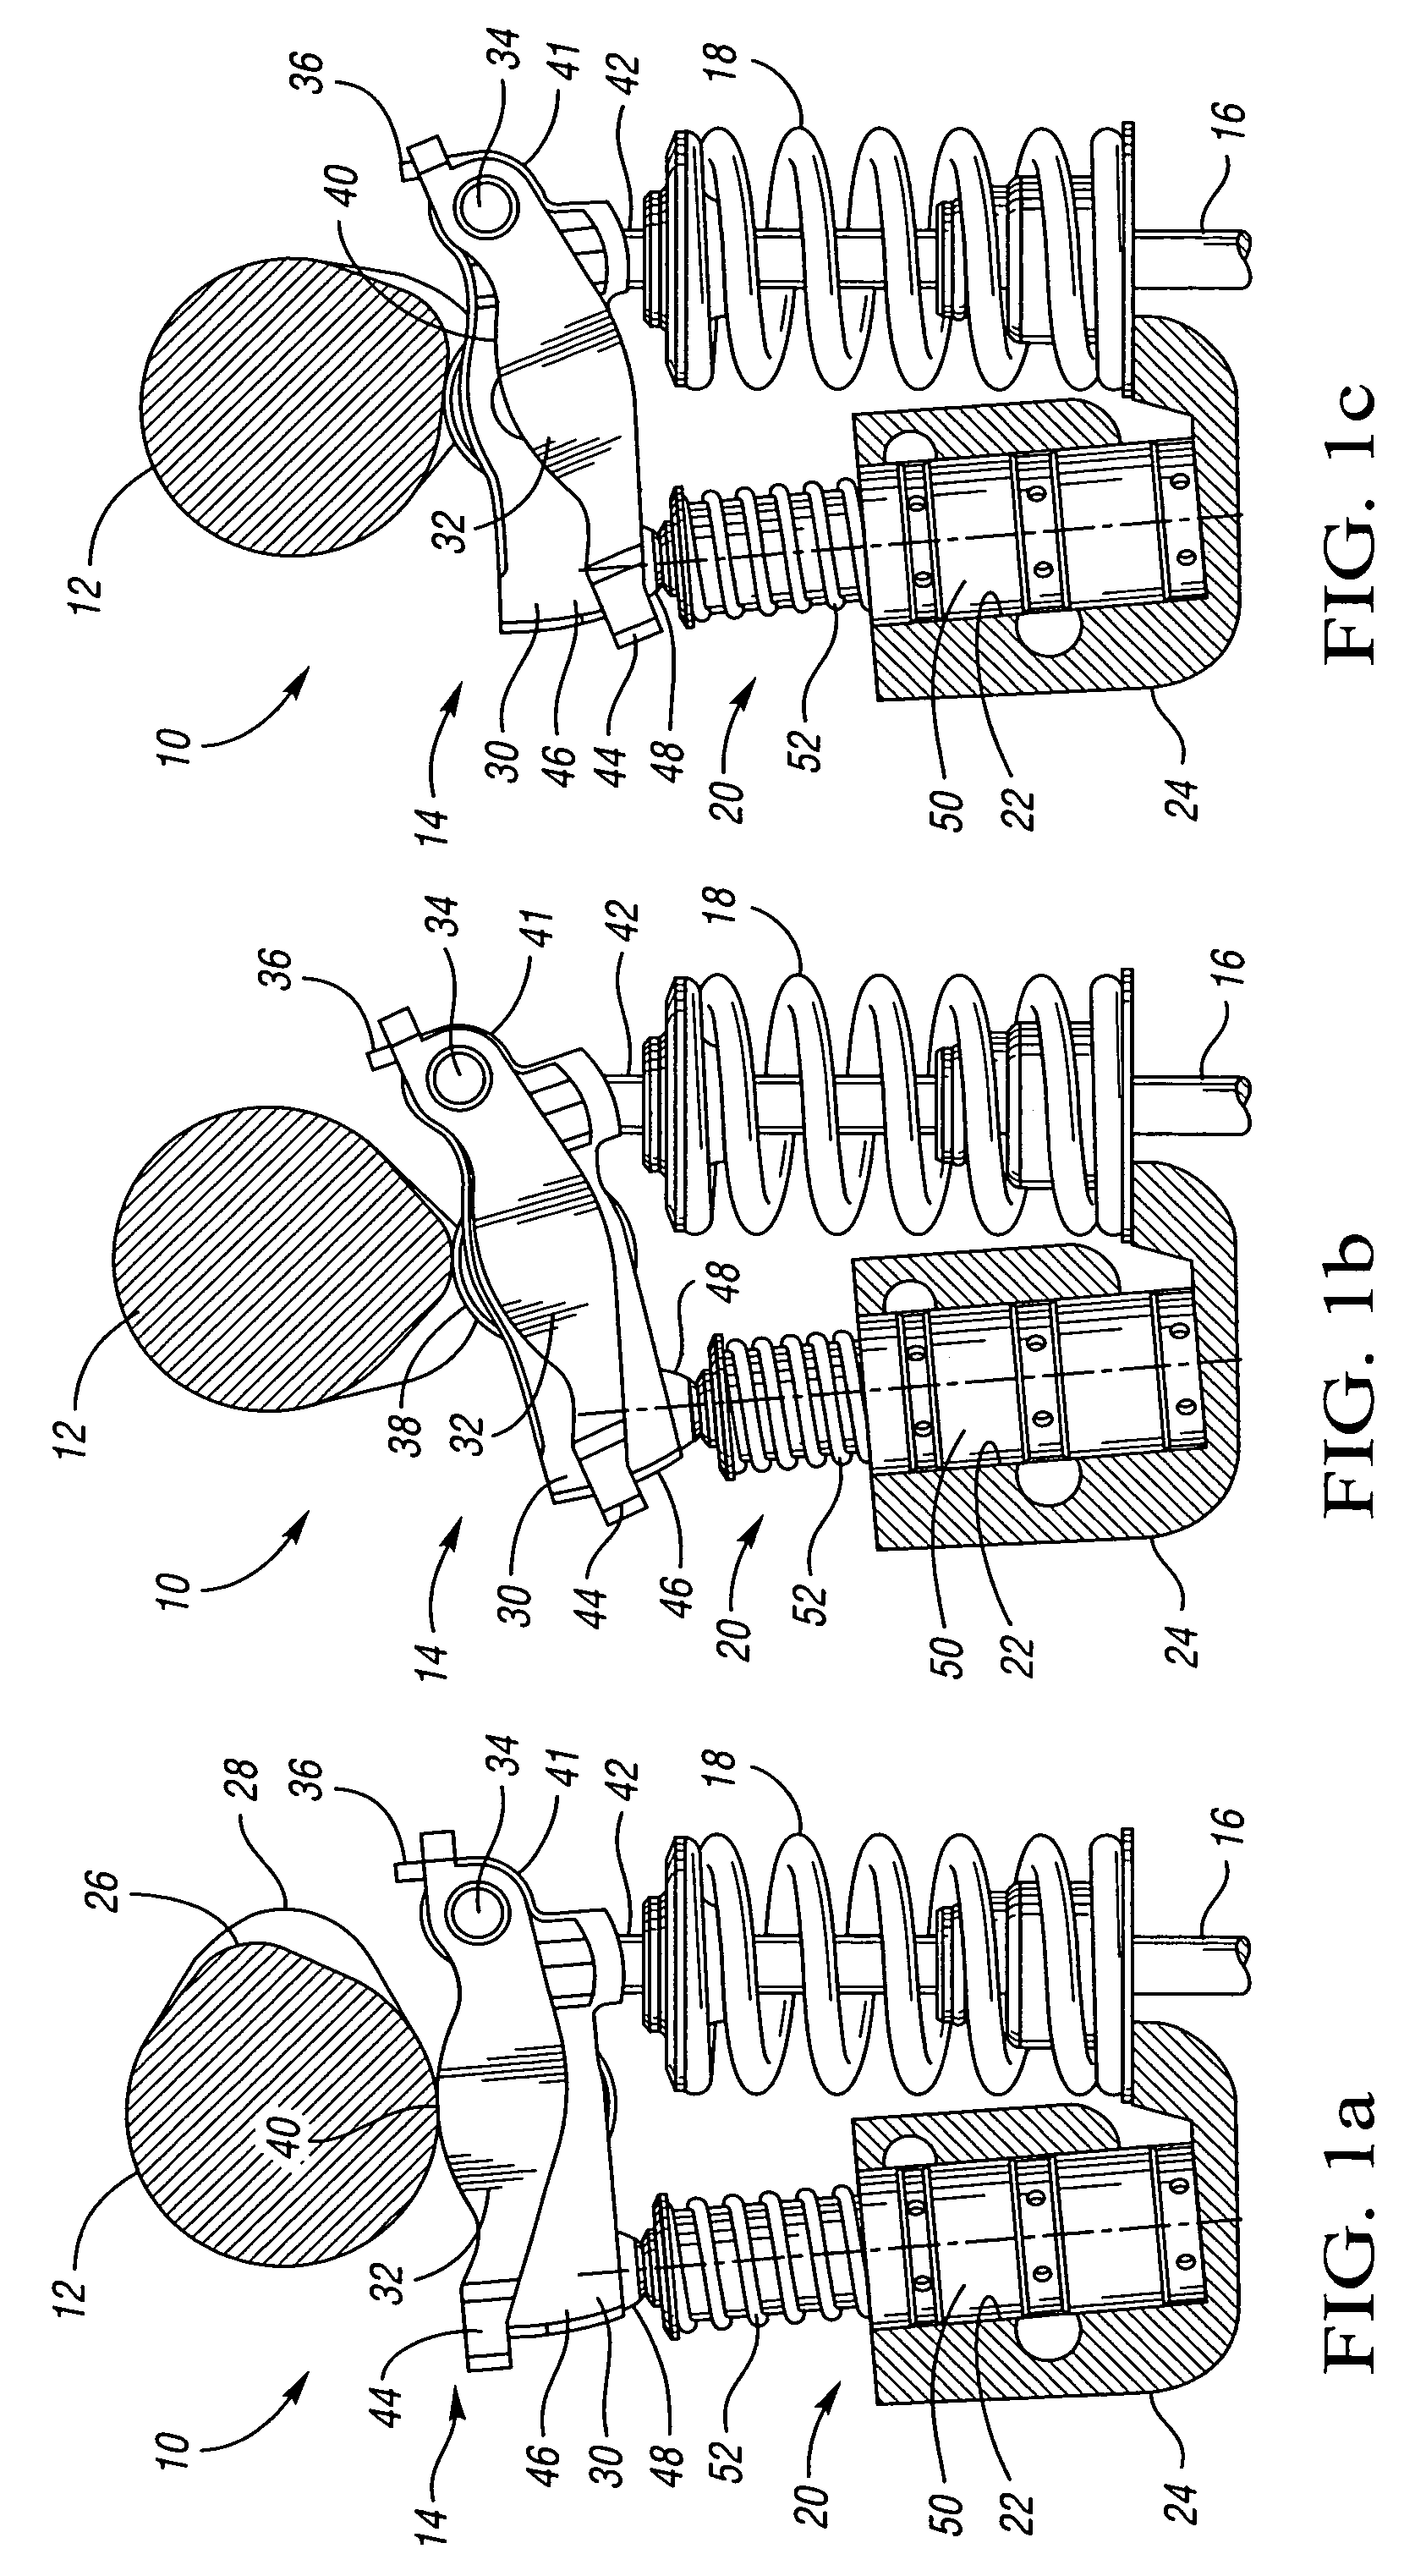 Valvetrain with two-step switchable rocker and deactivating stationary lash adjuster